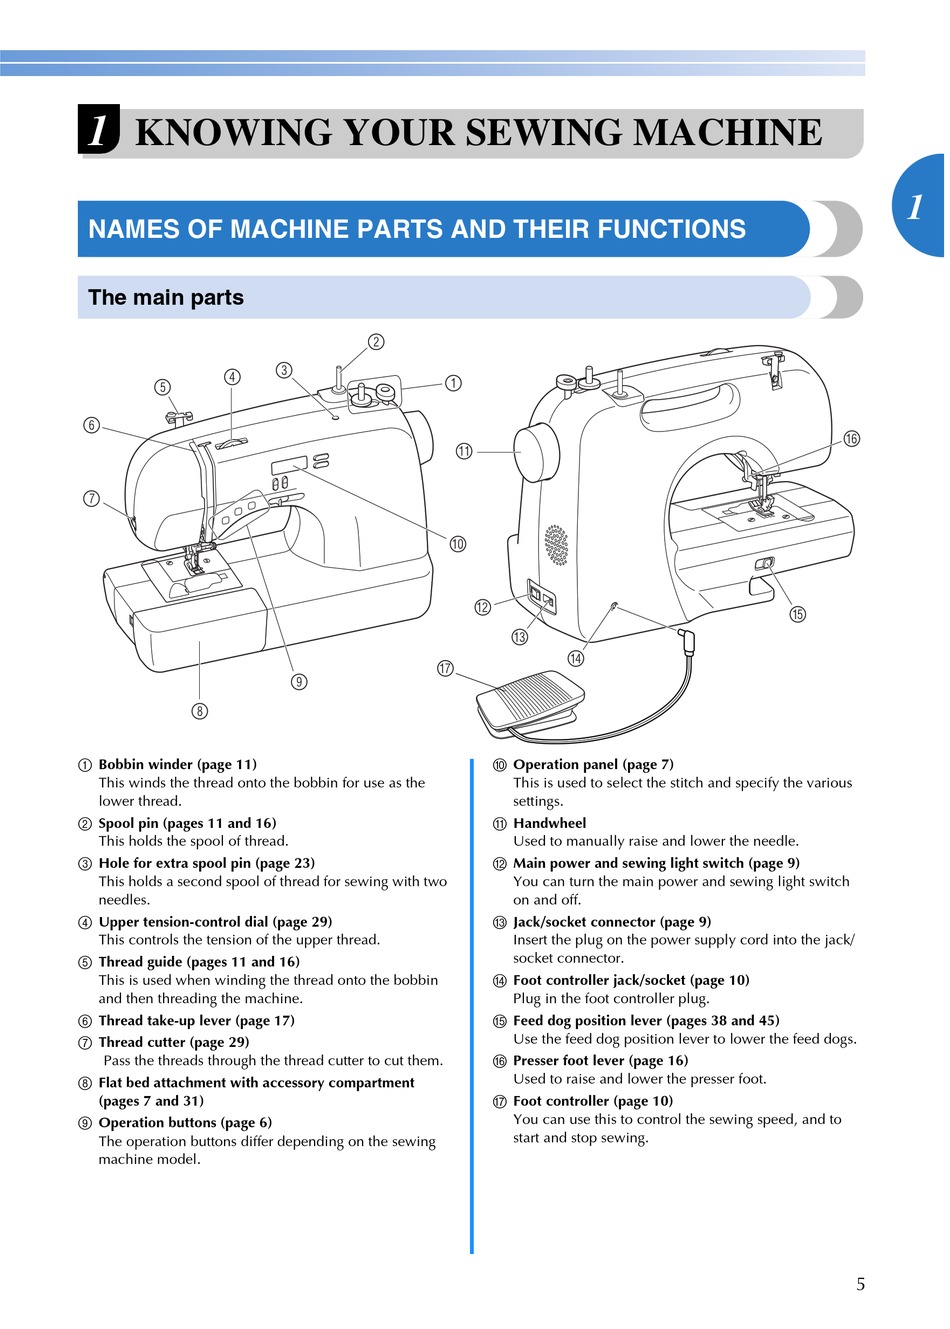 Chapter 1 Getting Ready; Names Of Machine Parts - Brother SE700 Operation  Manual [Page 11]